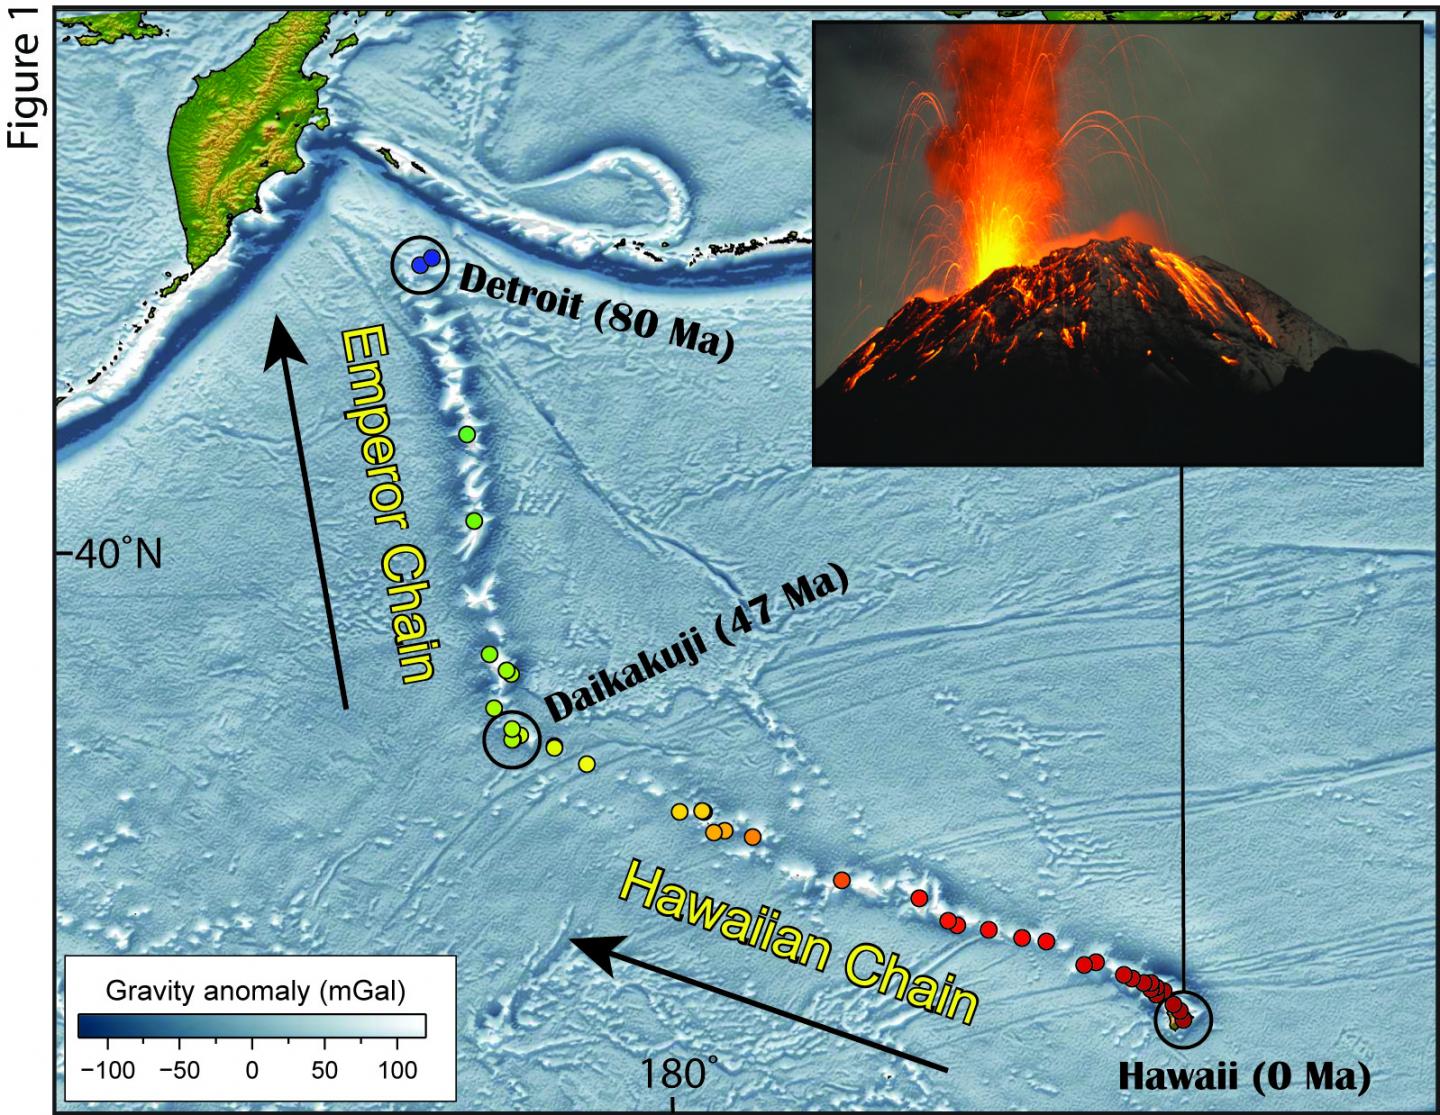 Active Volcanoes Mark the End of the Chain